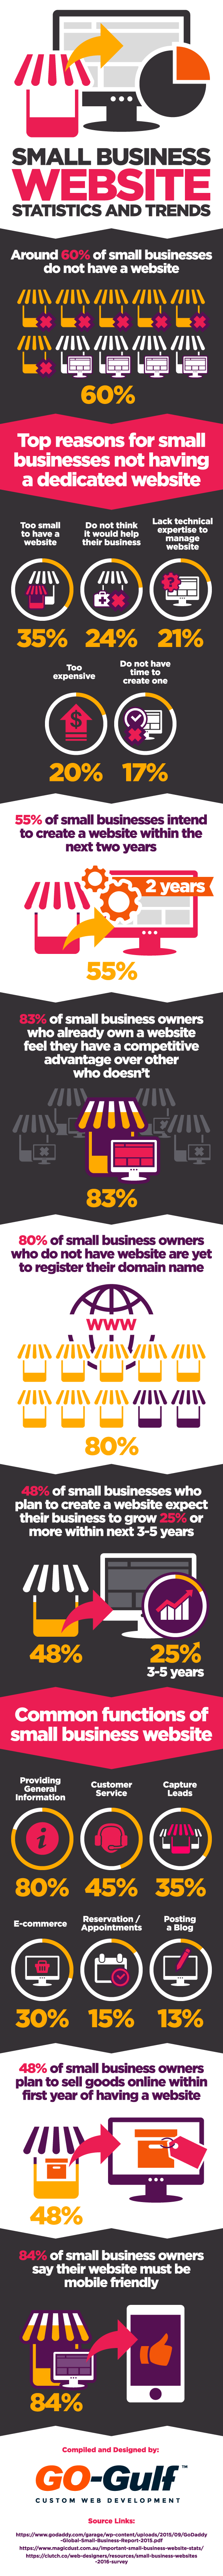 Small Business Website Statistics and Trends Infographic